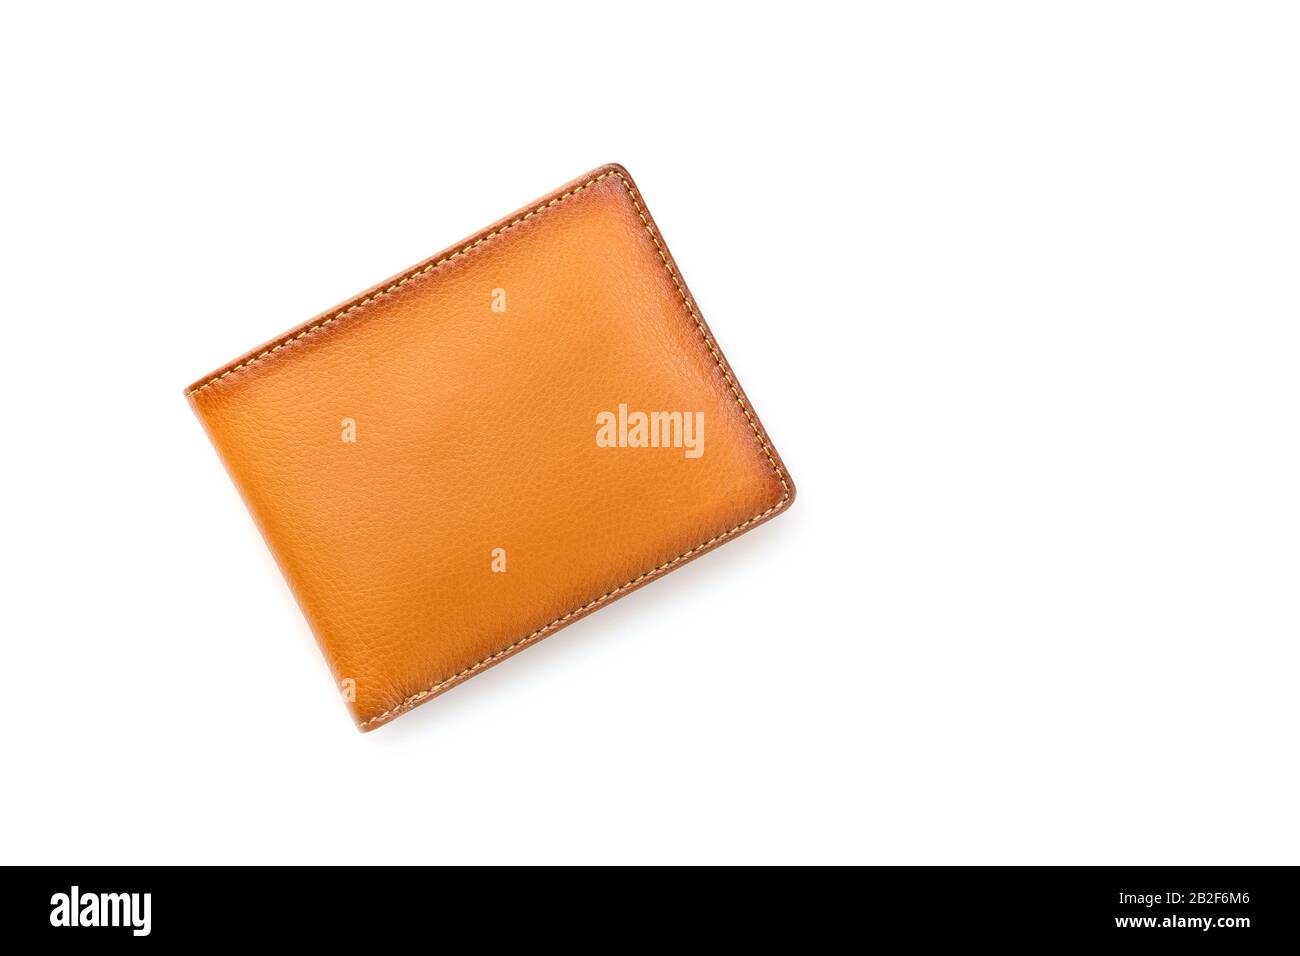 New leather brown men wallet isolated on white background Stock Photo